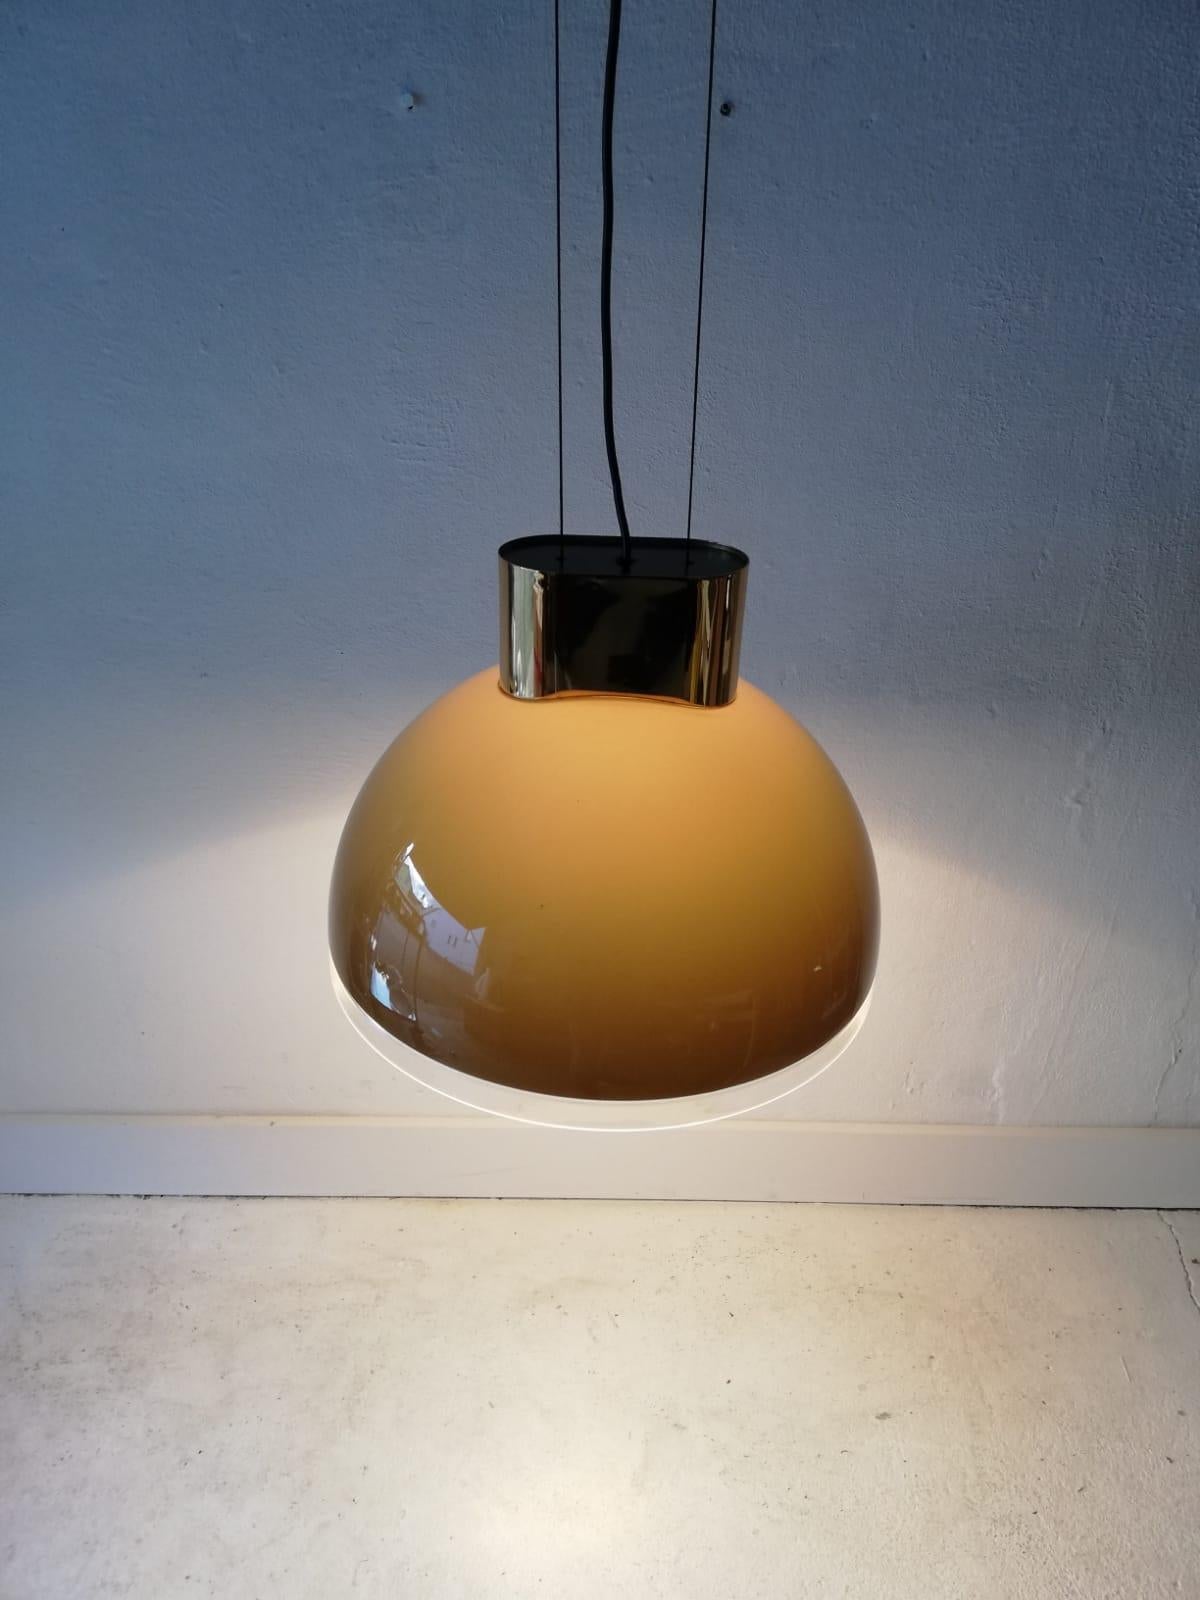 Late 20th Century Caramel Round Glass Pendant Lamp by Staff, 1980s Germany For Sale